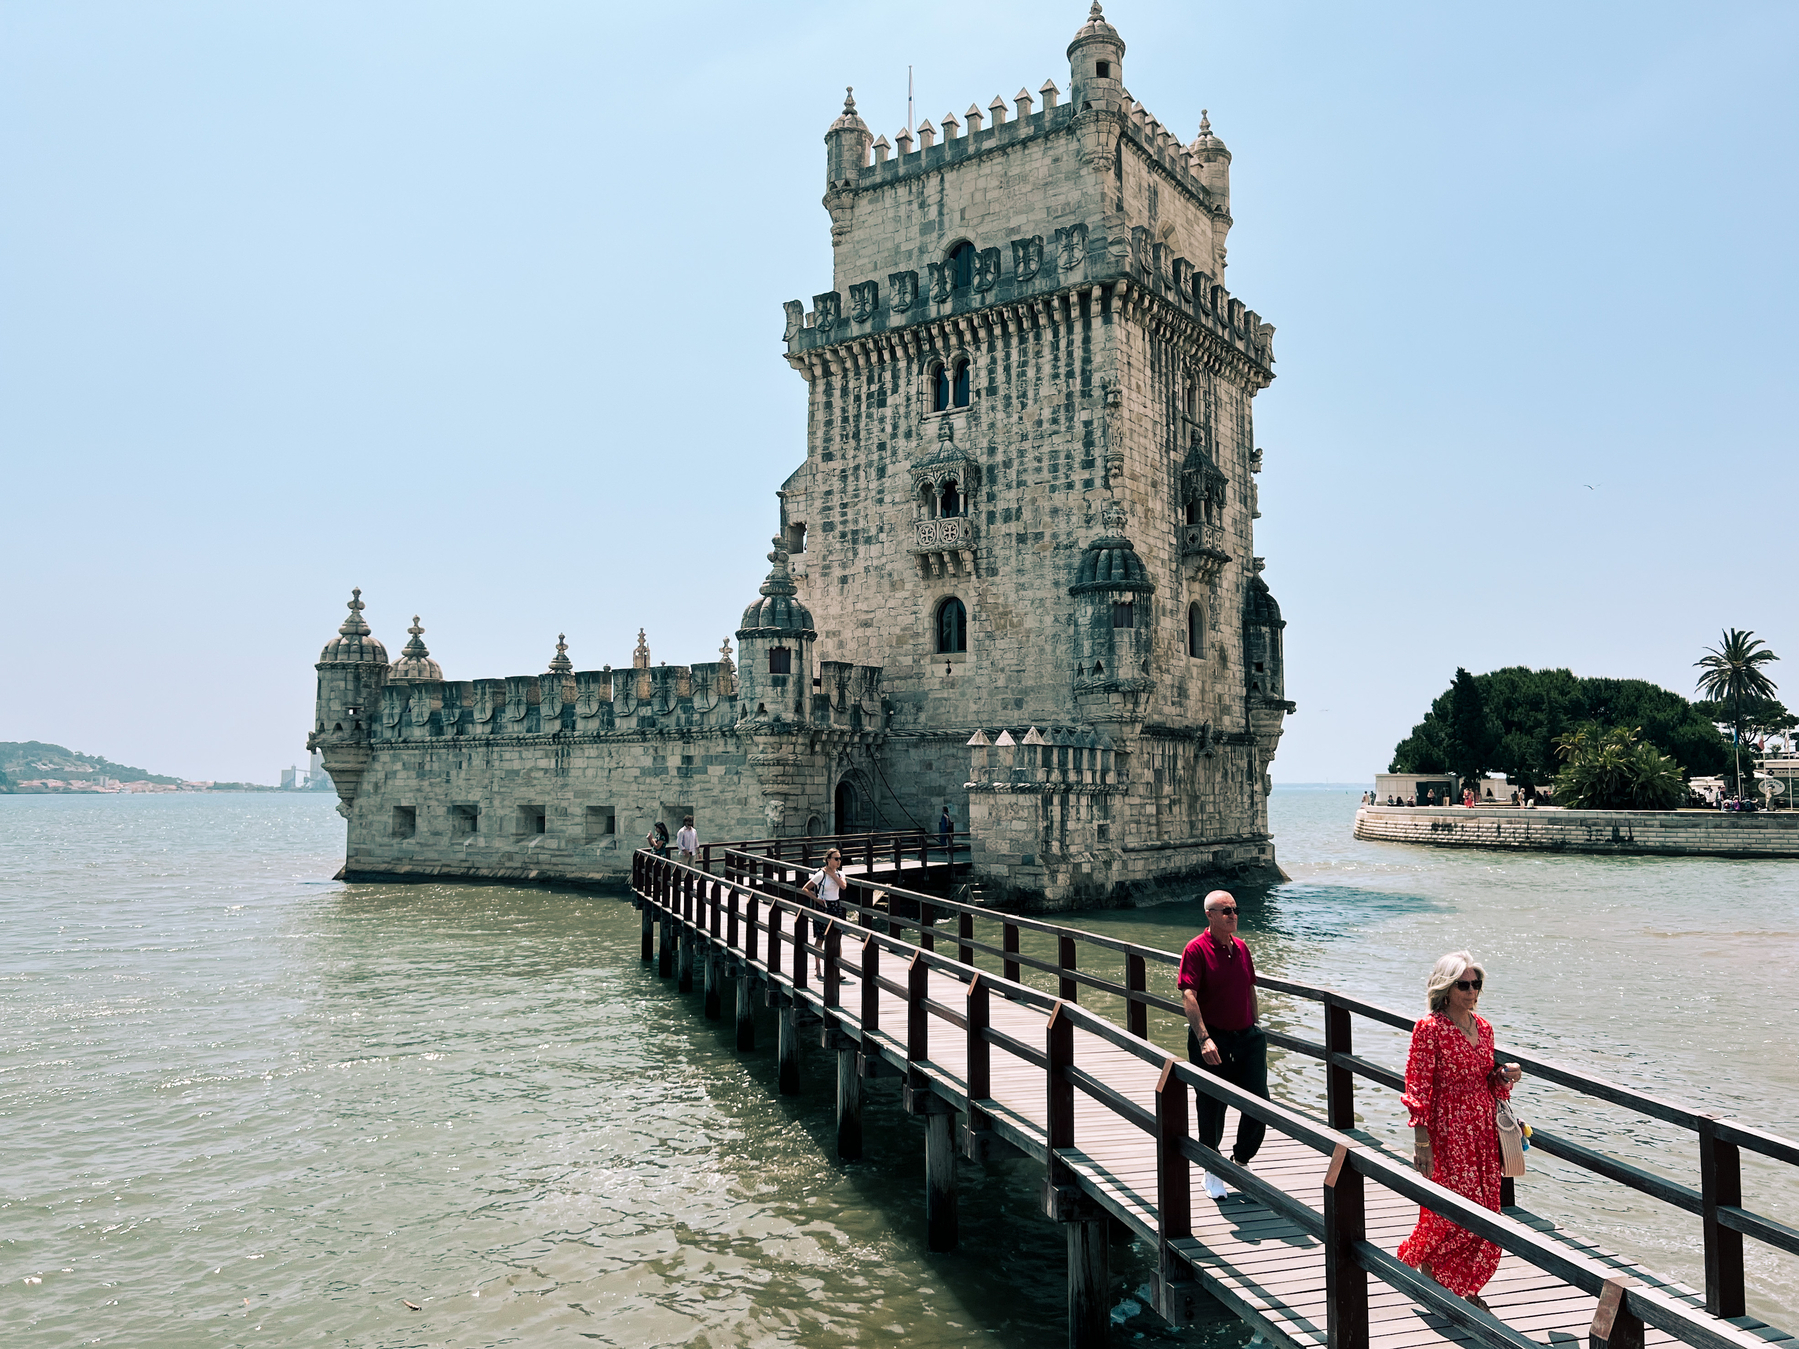 Tourists leave a castle like tower, on the river. 